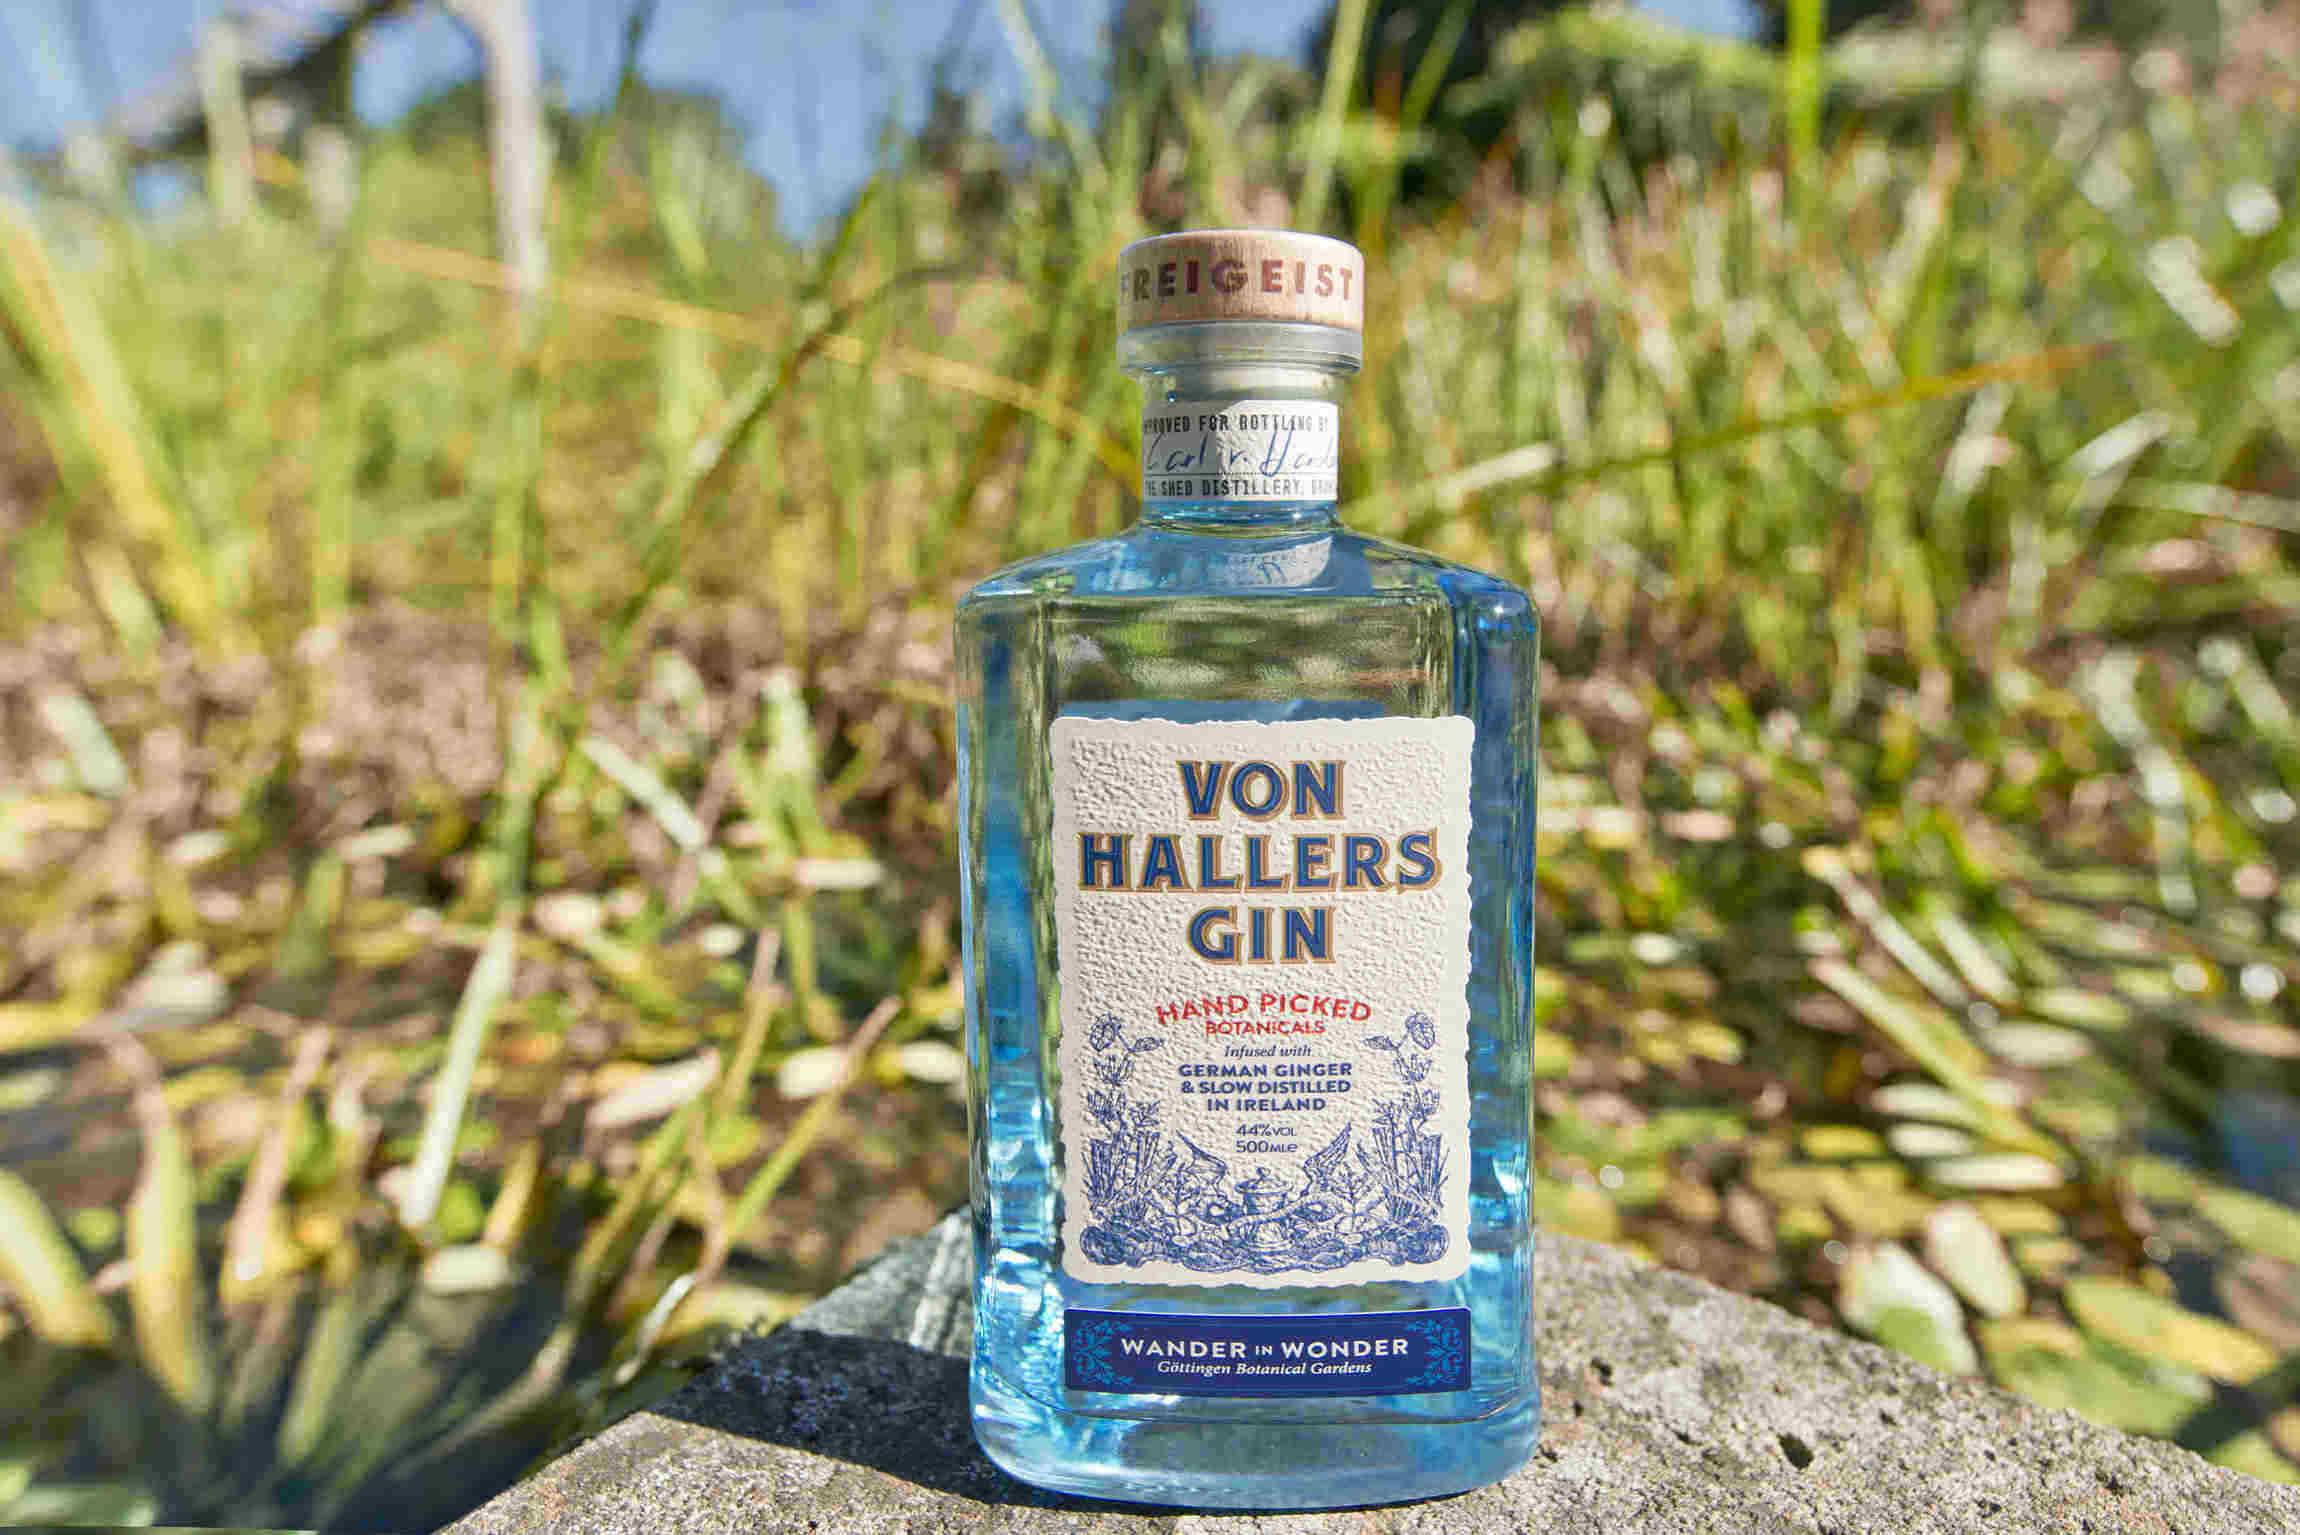 Only available in Germany and Ireland, Von Hallers Gin